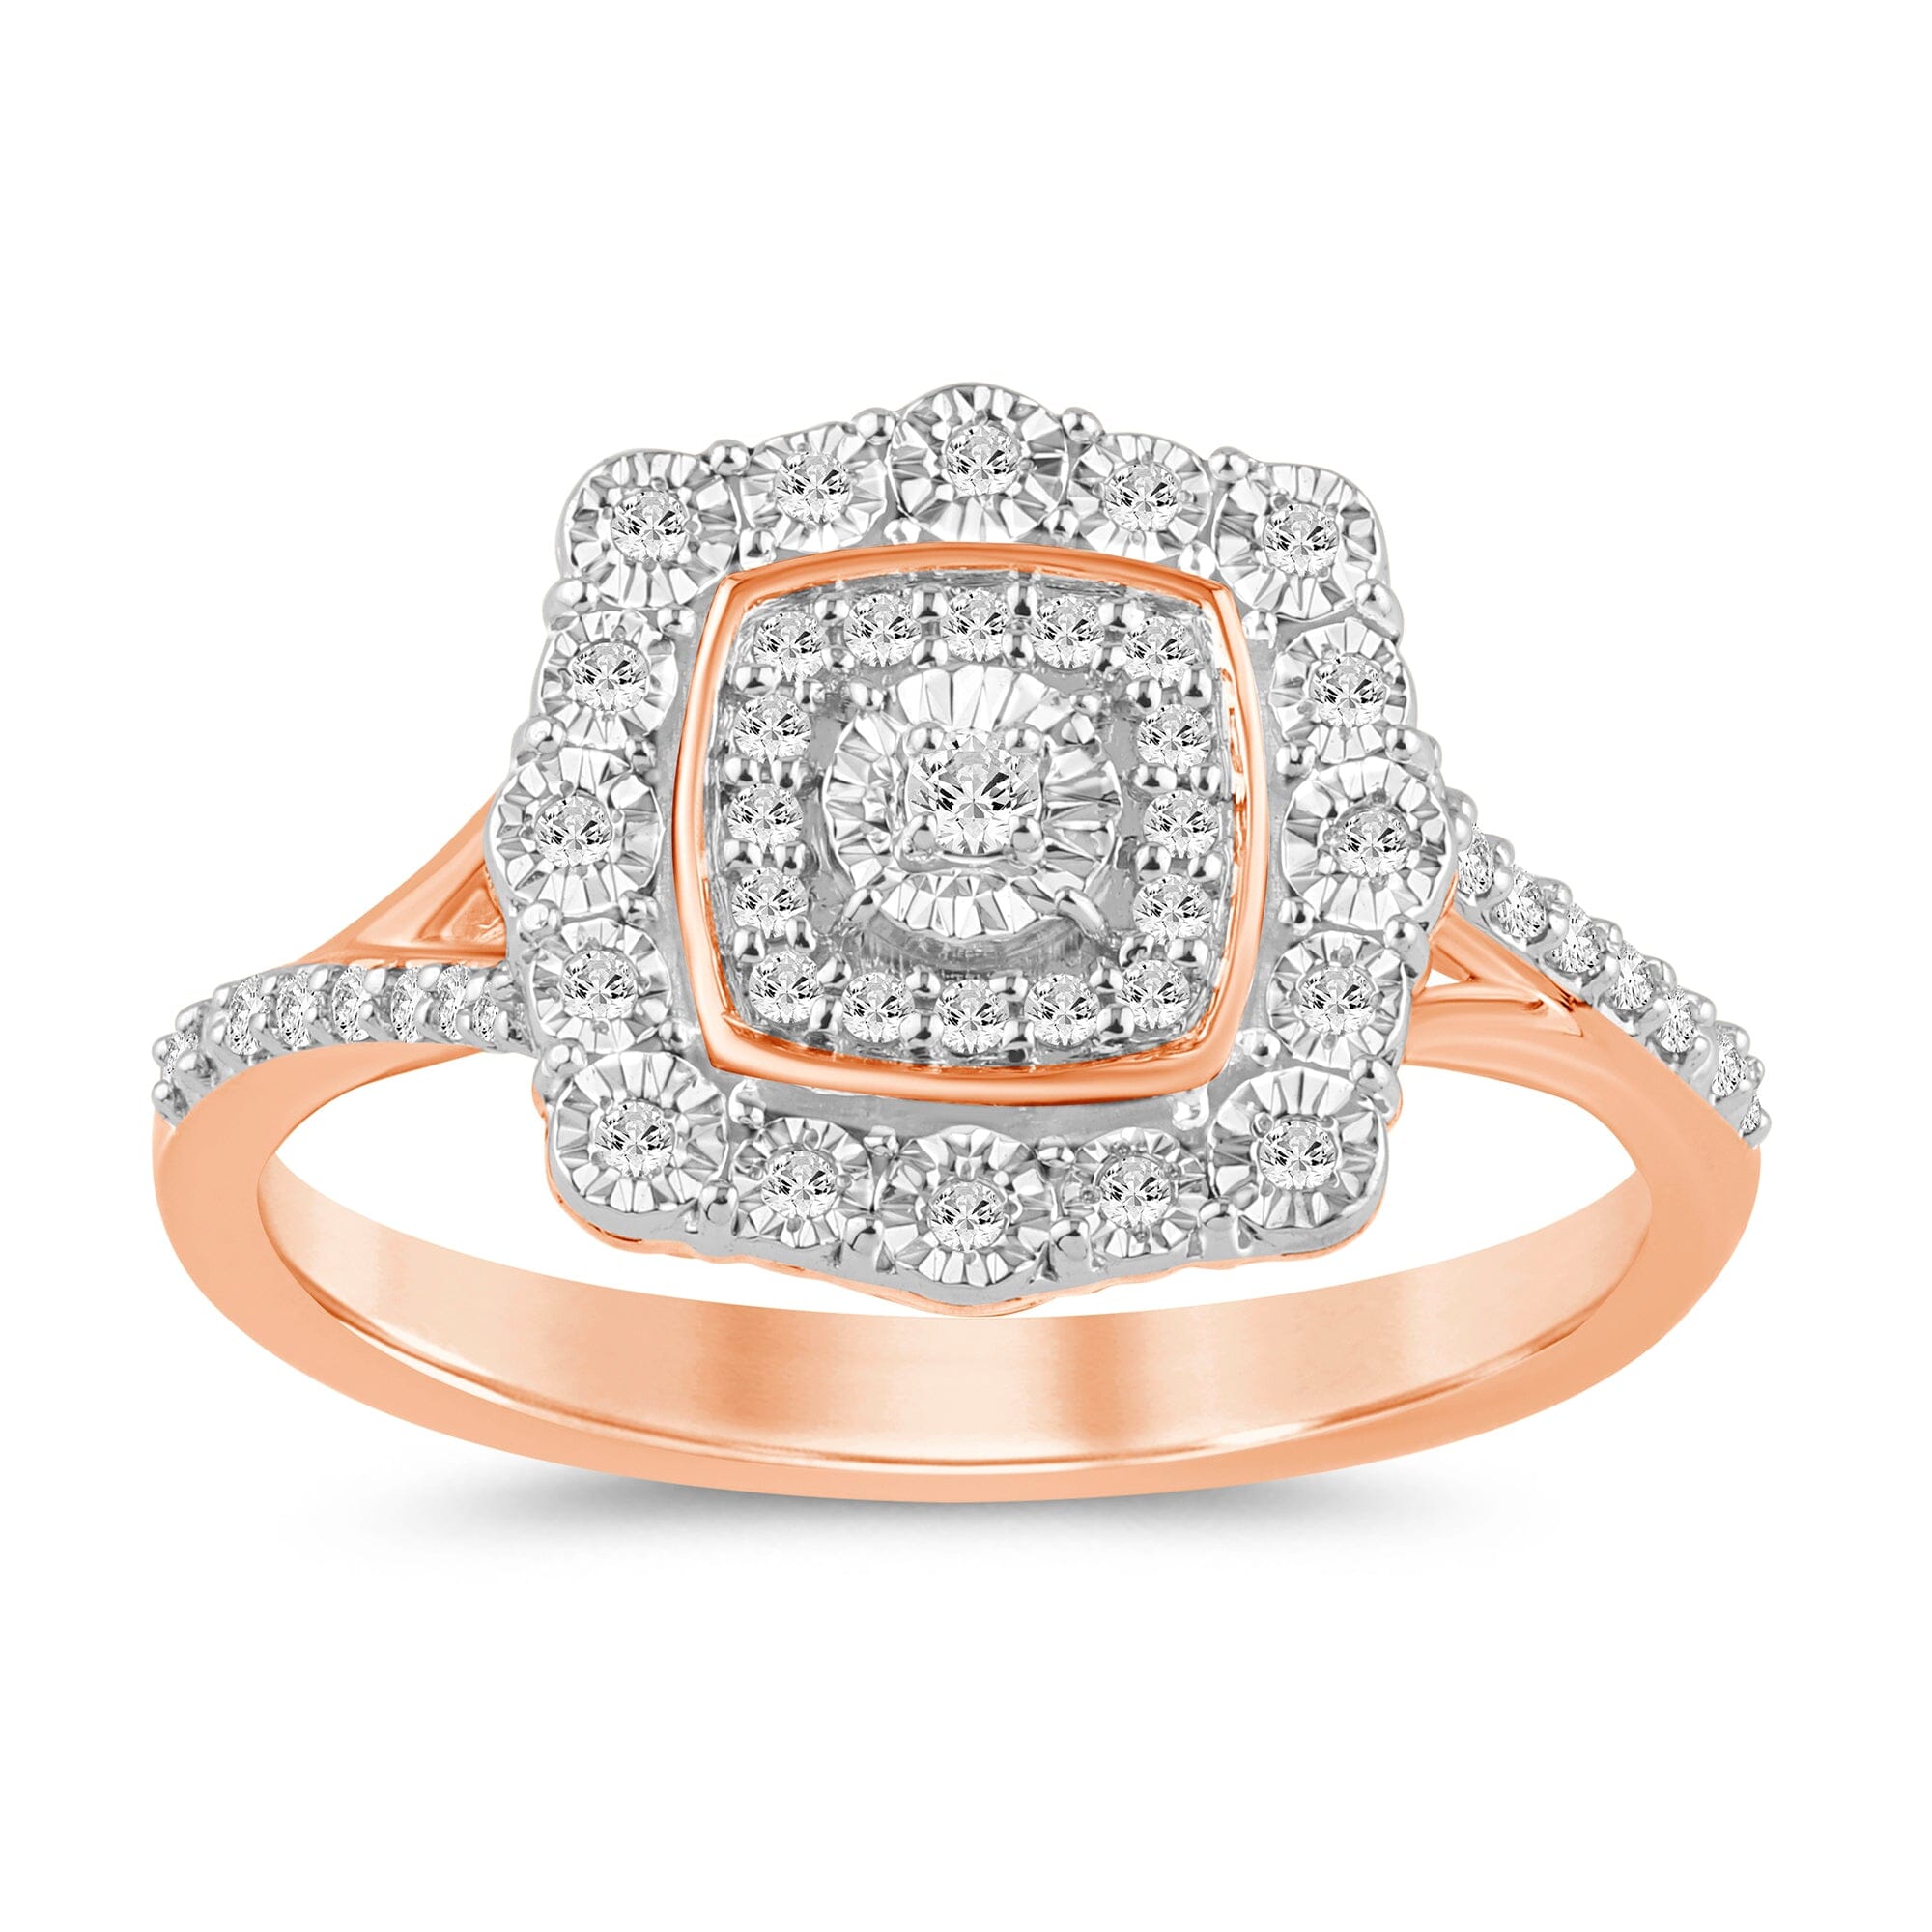 Fancy Miracle Halo Cushion Shaped Ring with 0.15ct Diamonds in 9ct Rose Gold Rings Bevilles 